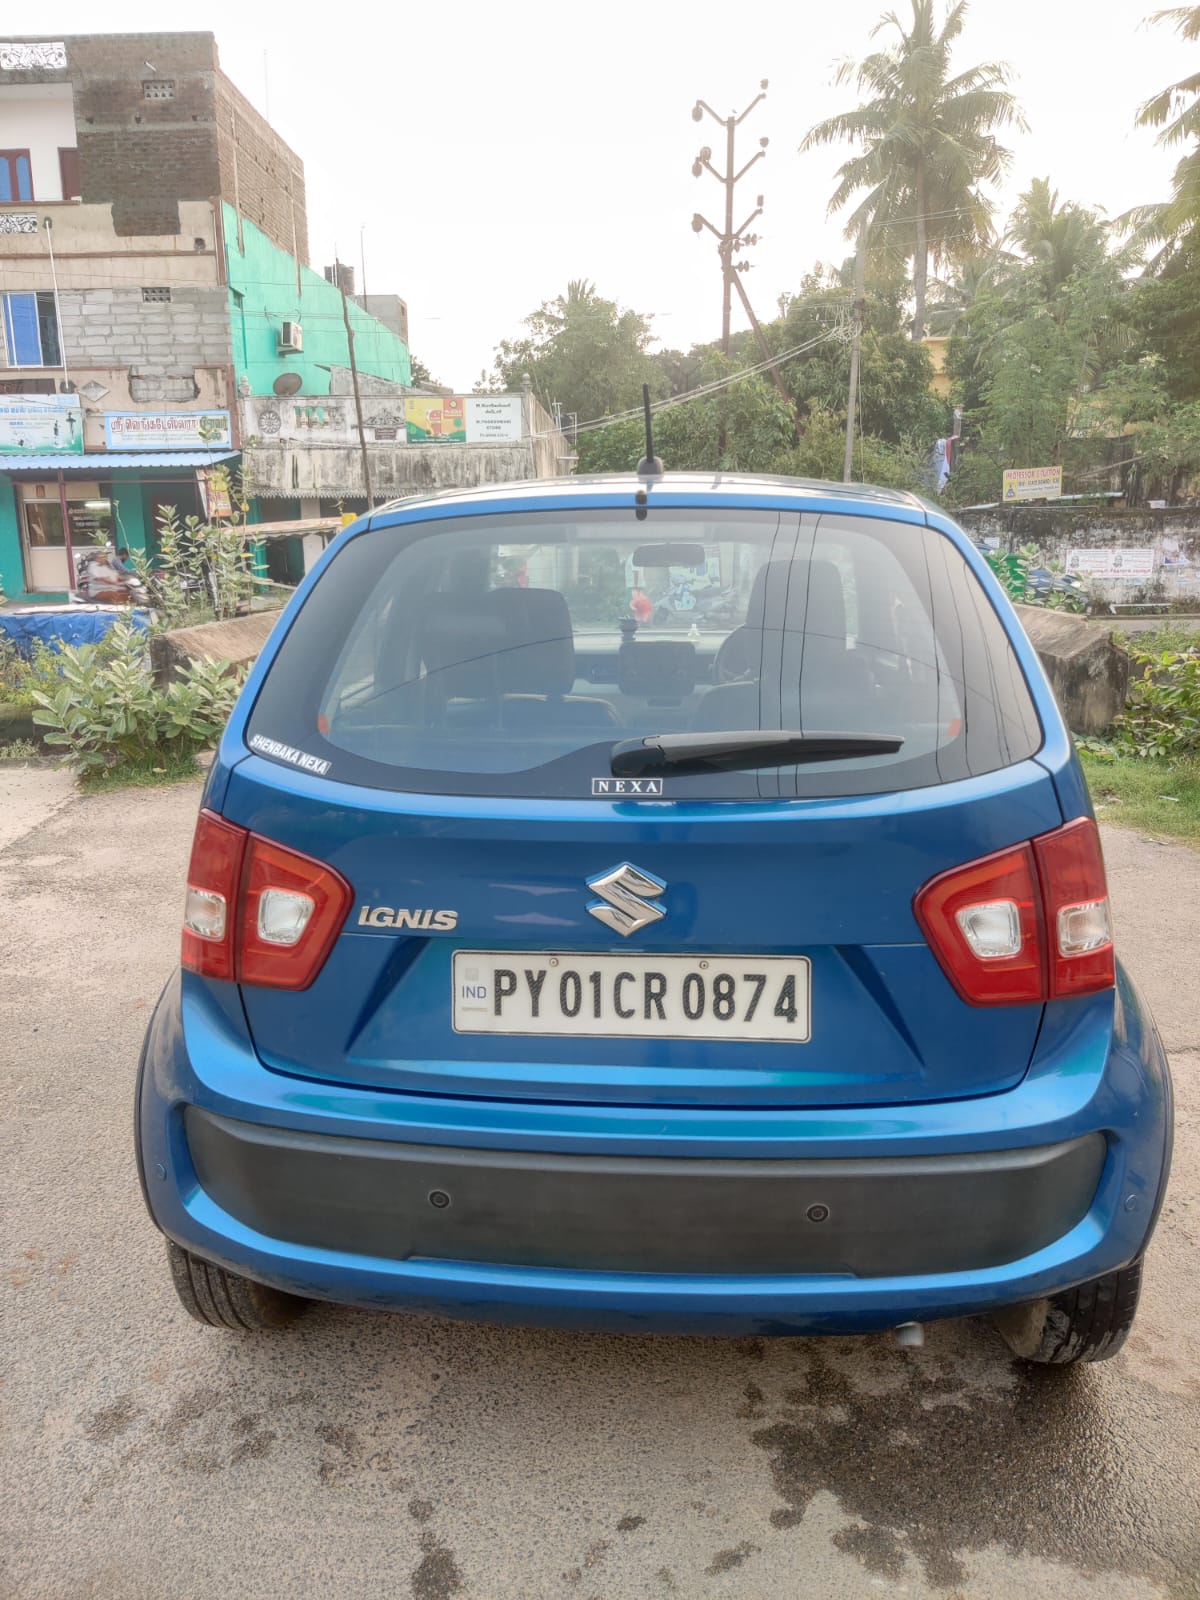 5313-for-sale-Maruthi-Suzuki-Iginis-Petrol-First-Owner-2017-PY-registered-rs-479000